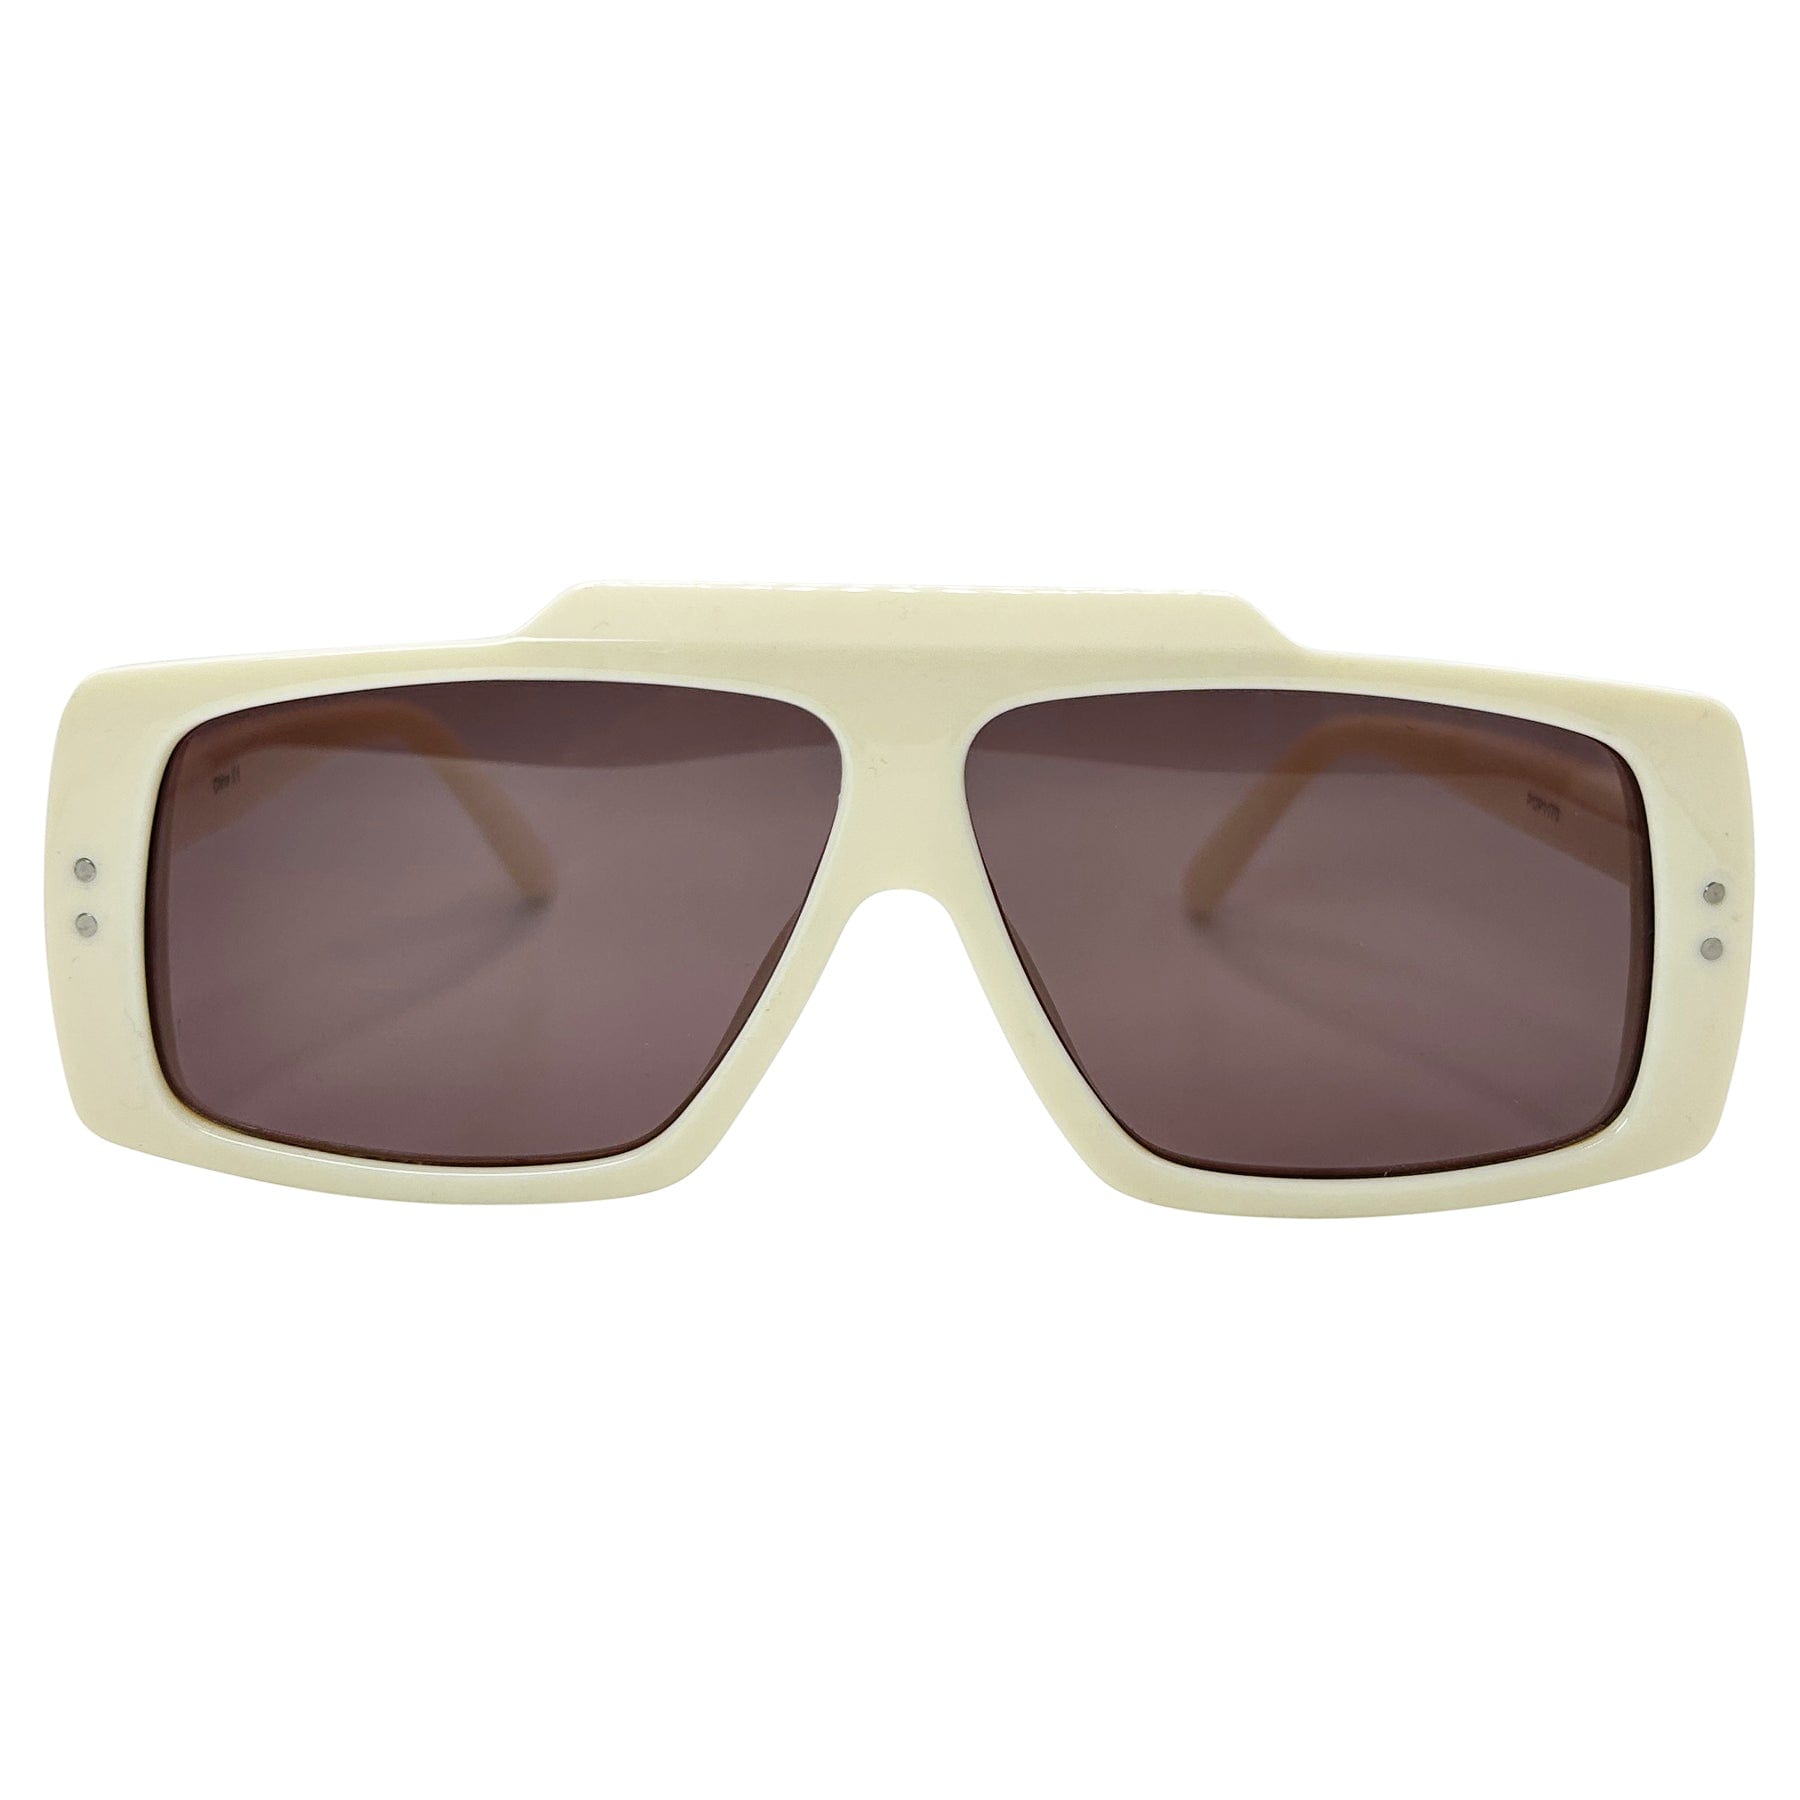 70s inspired retro sunglasses with an ivory colored frame and brown lens